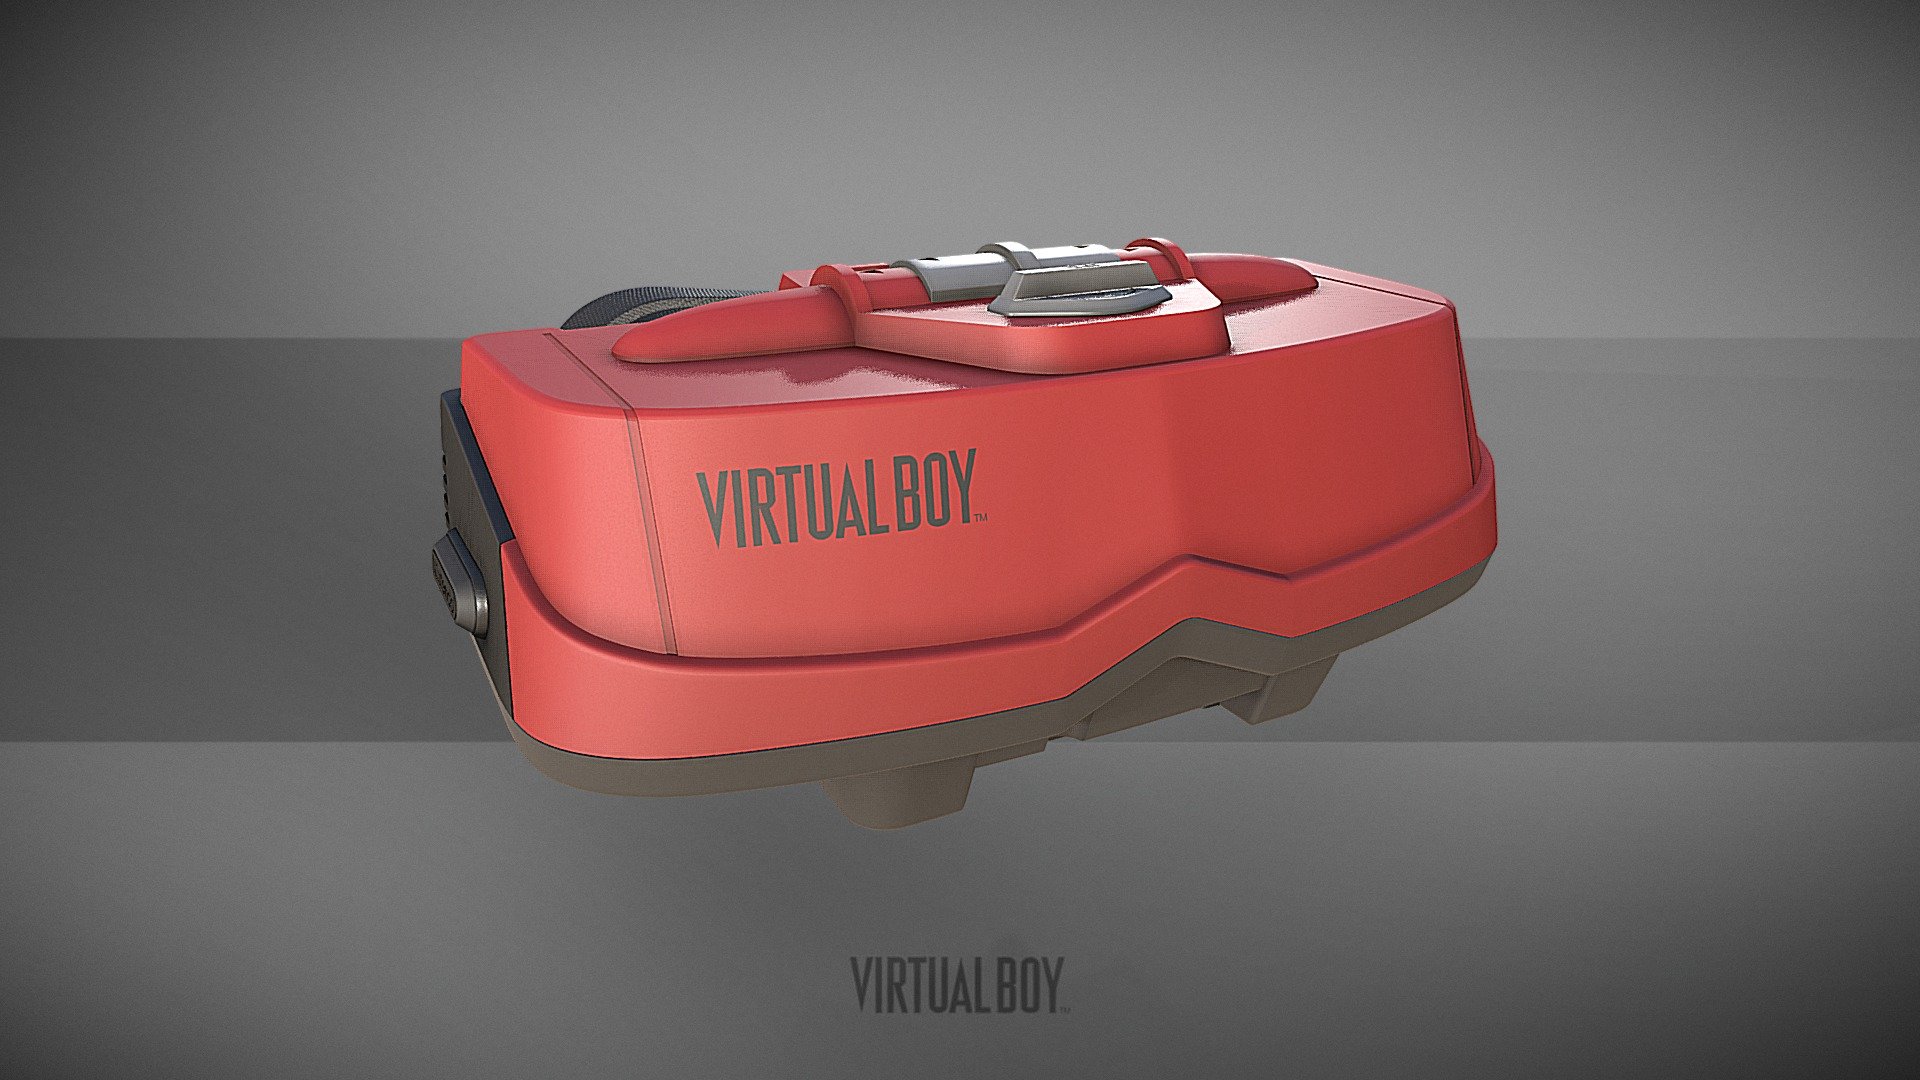 The Virtual Boy is a 3D video game console developed by Nintendo, released on 1995 in Japan and North America.

It was marketed as the first video game system capable of displaying stereoscopic 3D graphics and as a virtual reality device.

Read more on the Sketchfab blog



Modeled and textured by Murilo Kleine

https://sketchfab.com/murilo.kleine - Virtual Boy - Buy Royalty Free 3D model by Virtual Studio (@virtualstudio) 3d model